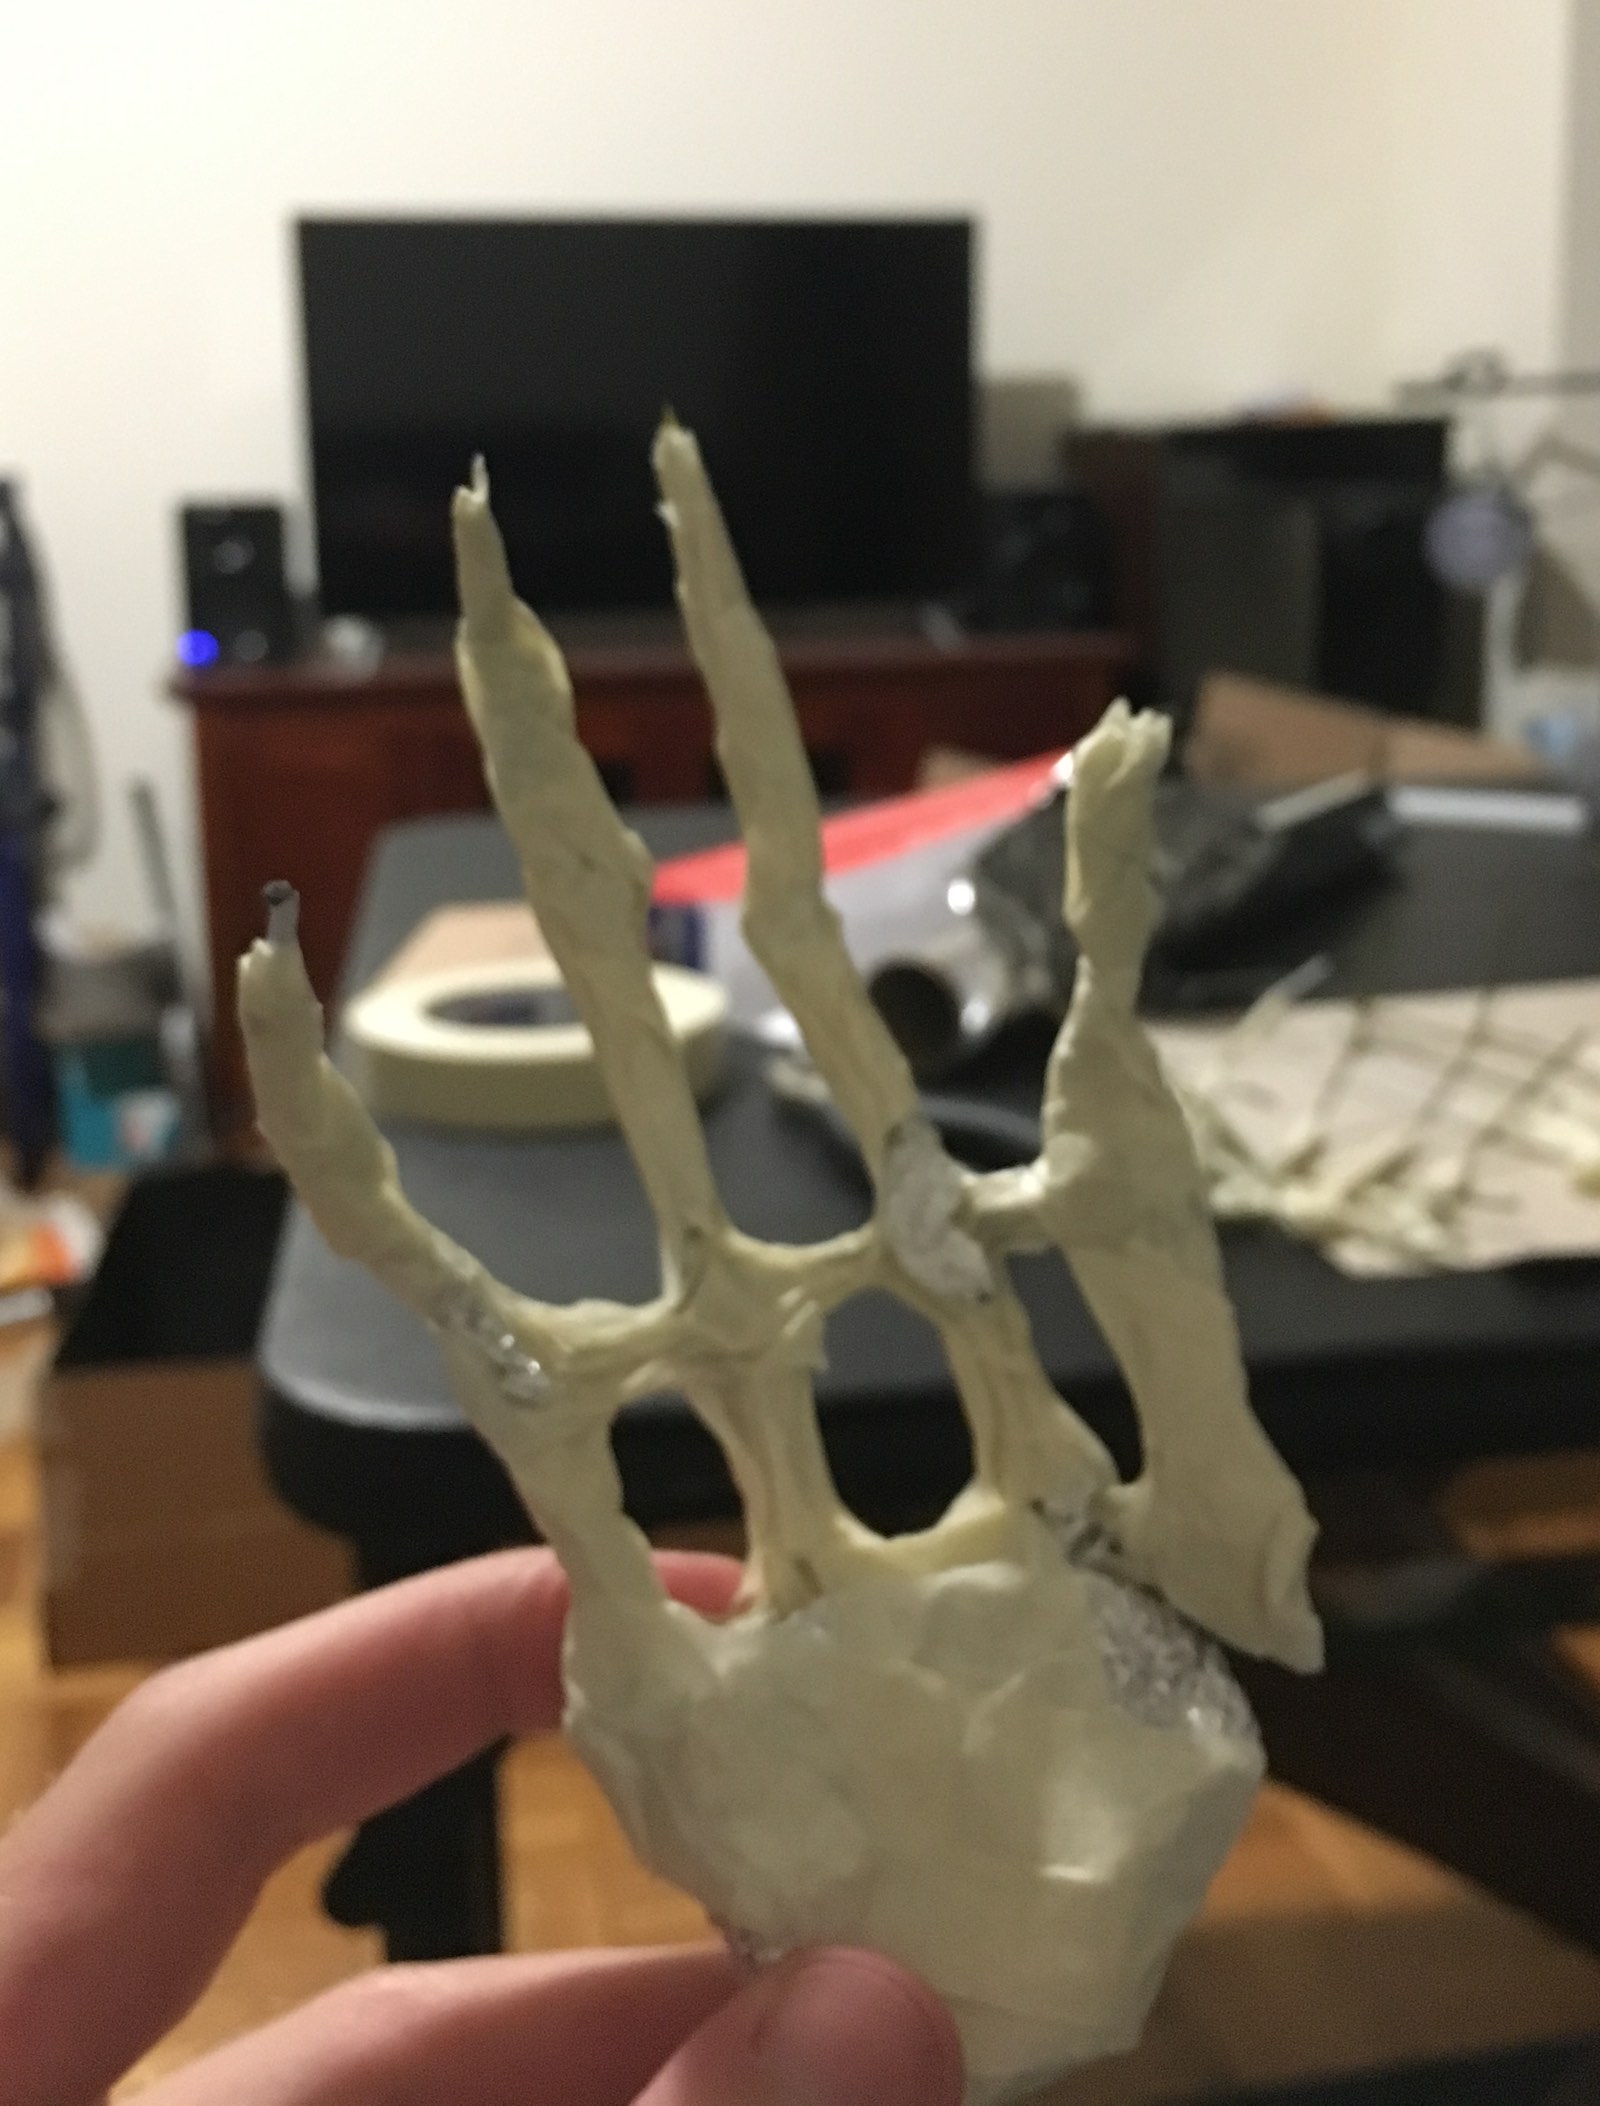 An incomplete armature for a skeleton hand